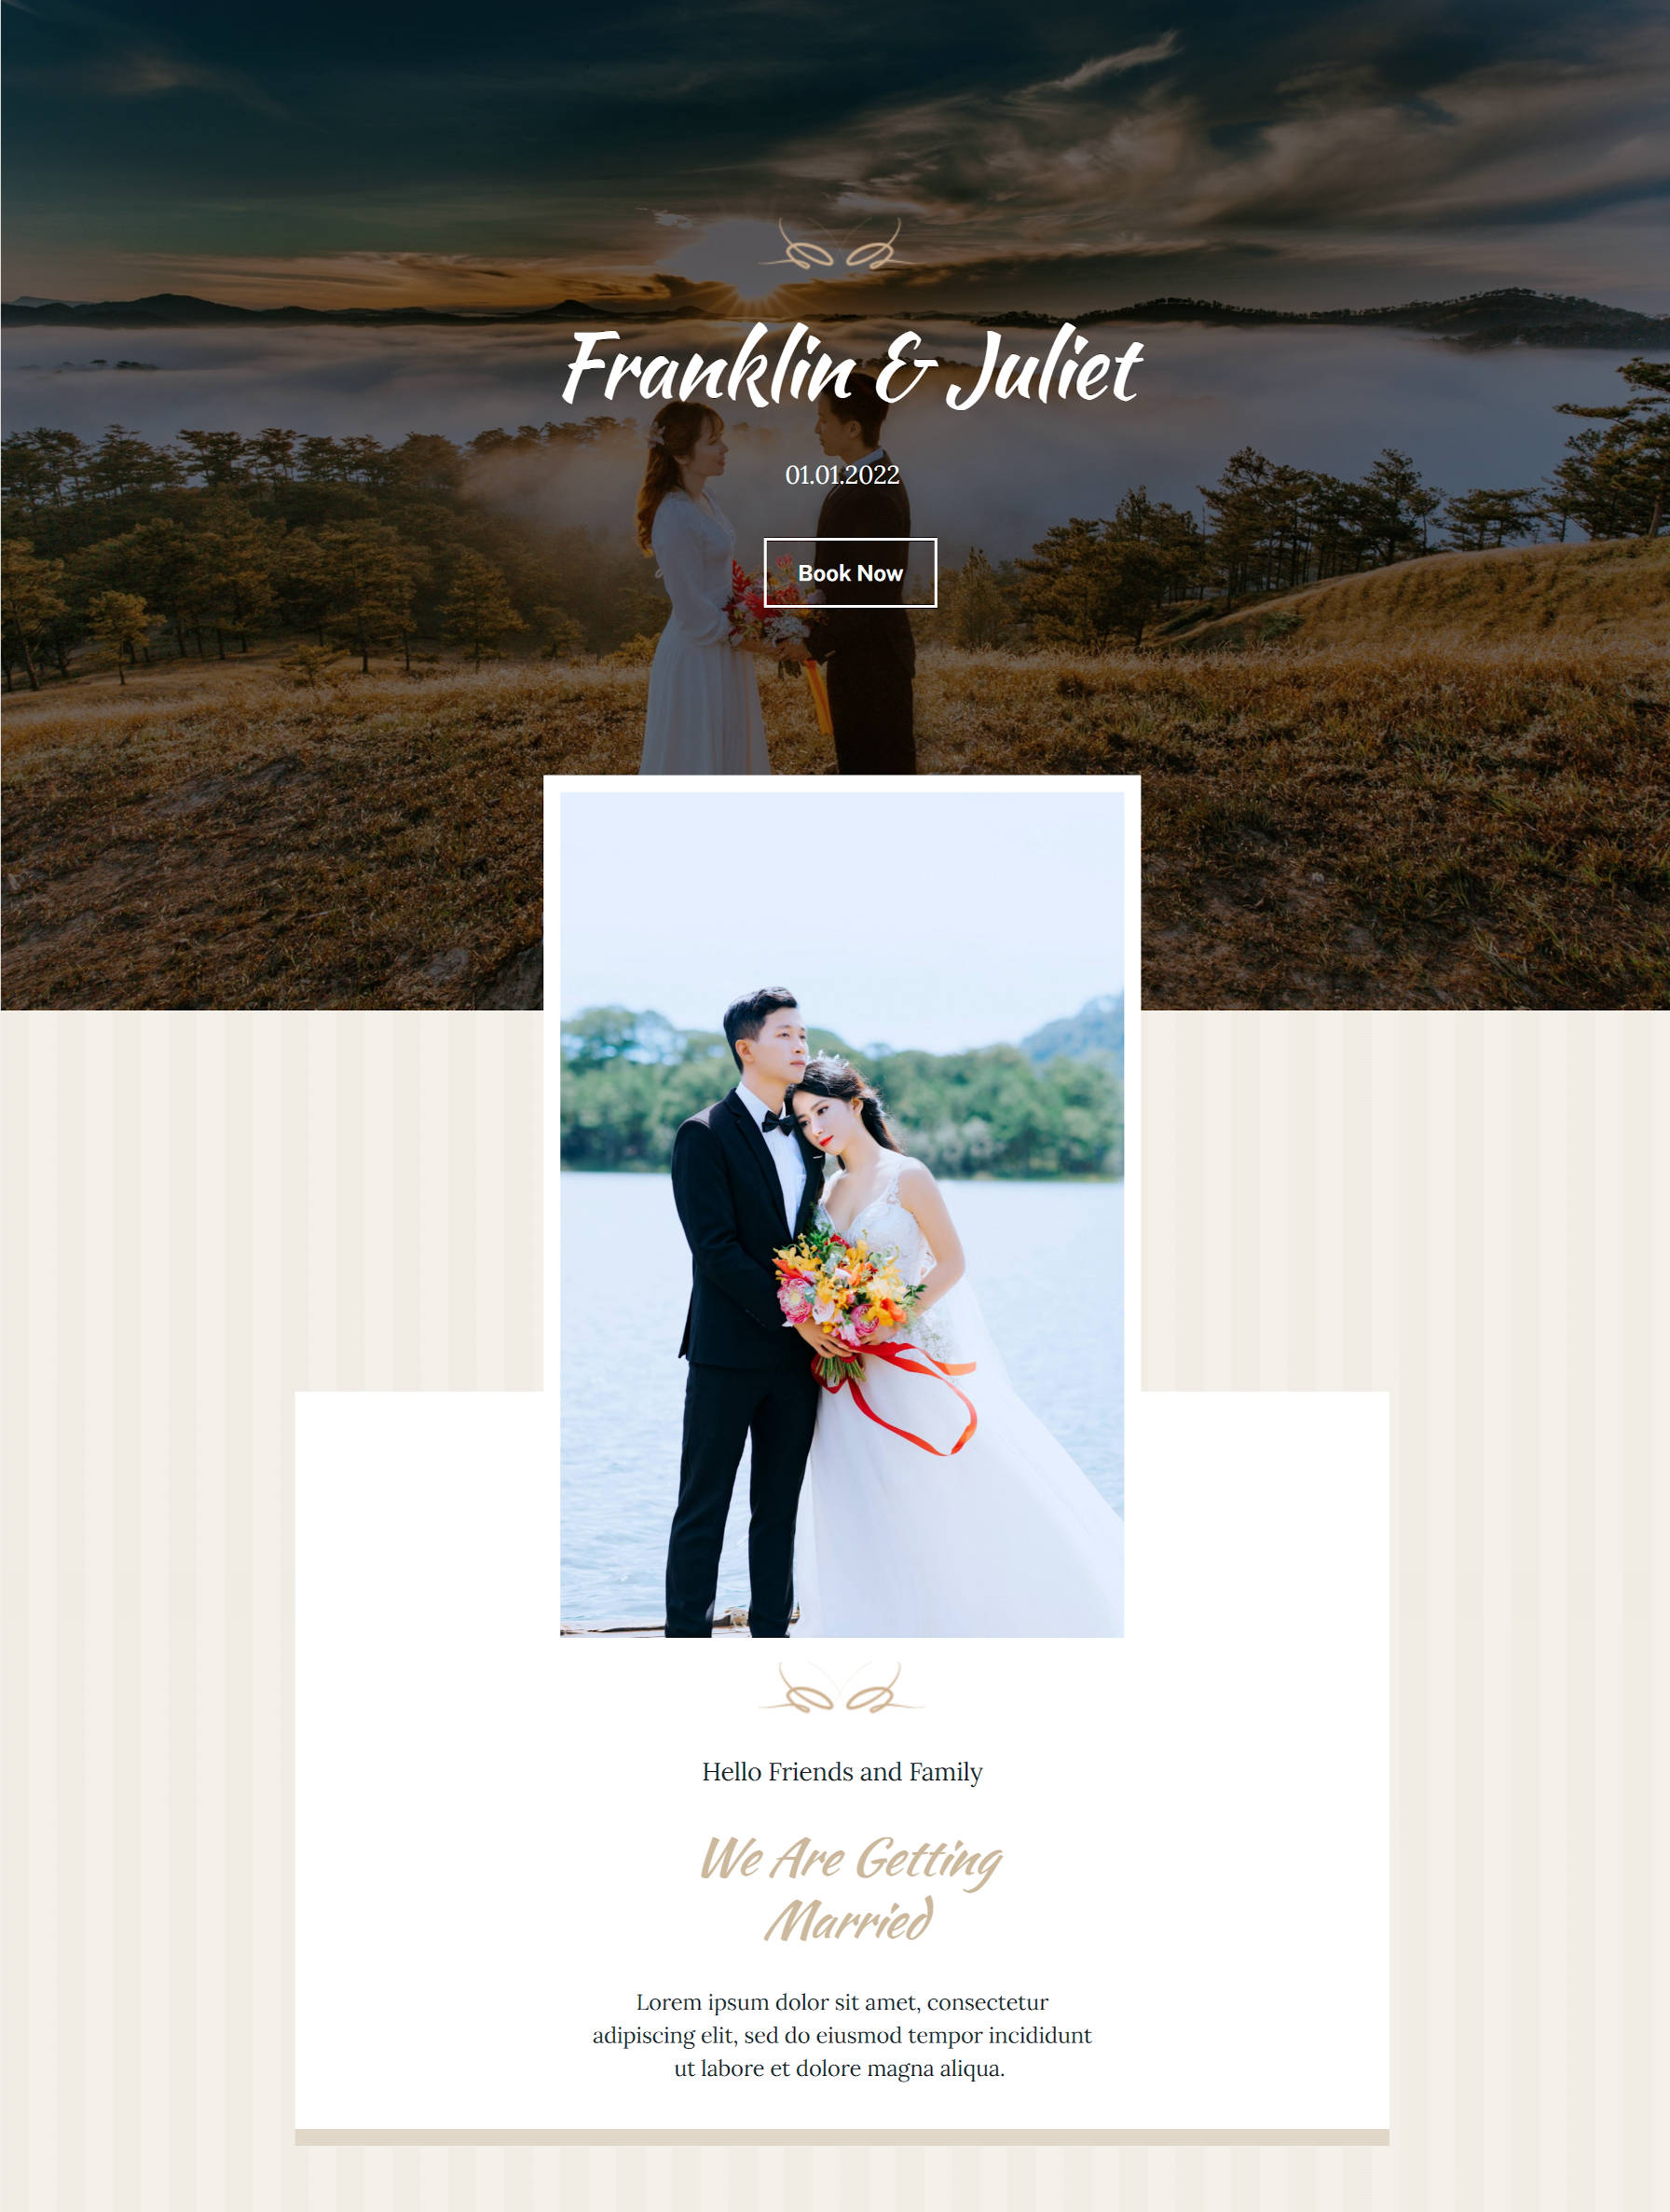 Content area of a wedding homepage design with a hero header, overlapping image, and text.